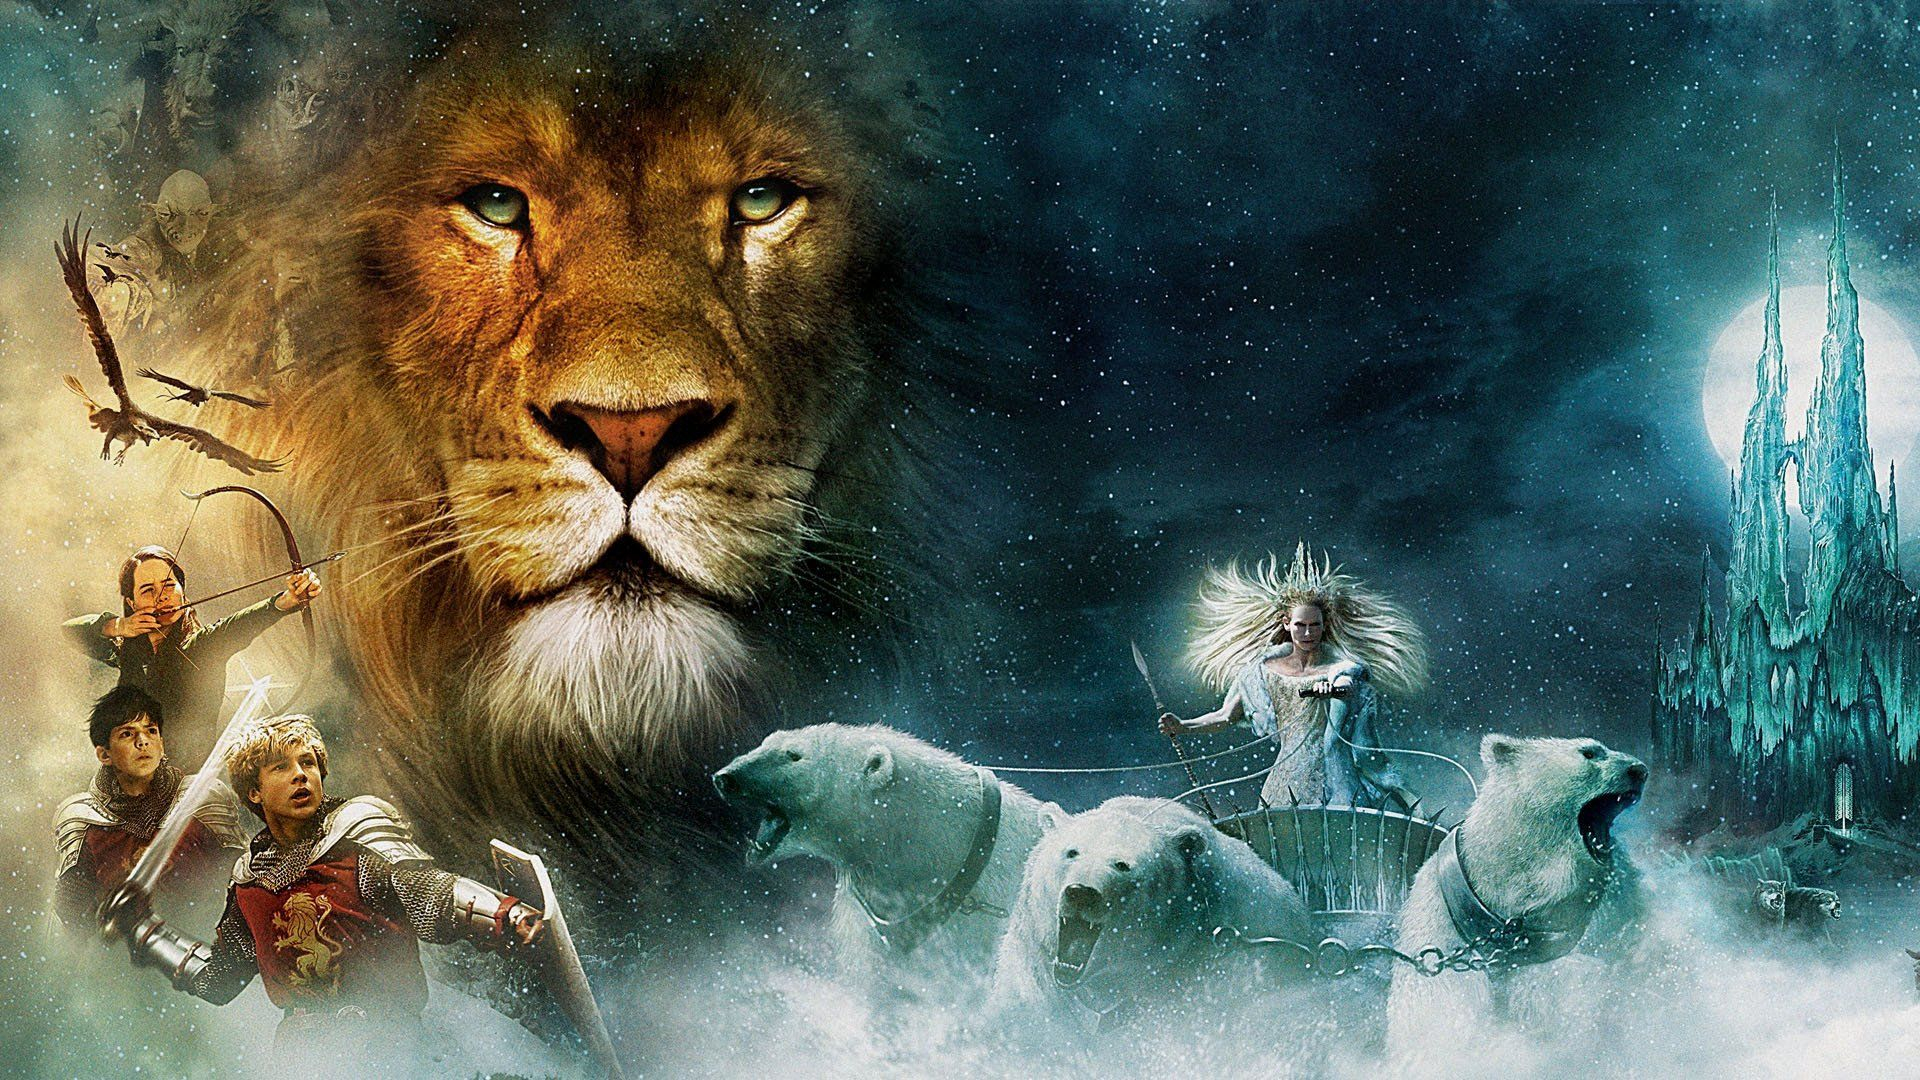 1920x1080 The Chronicles Of Narnia Wallpapers Top Free The Chronicles Of Narnia Backgrounds